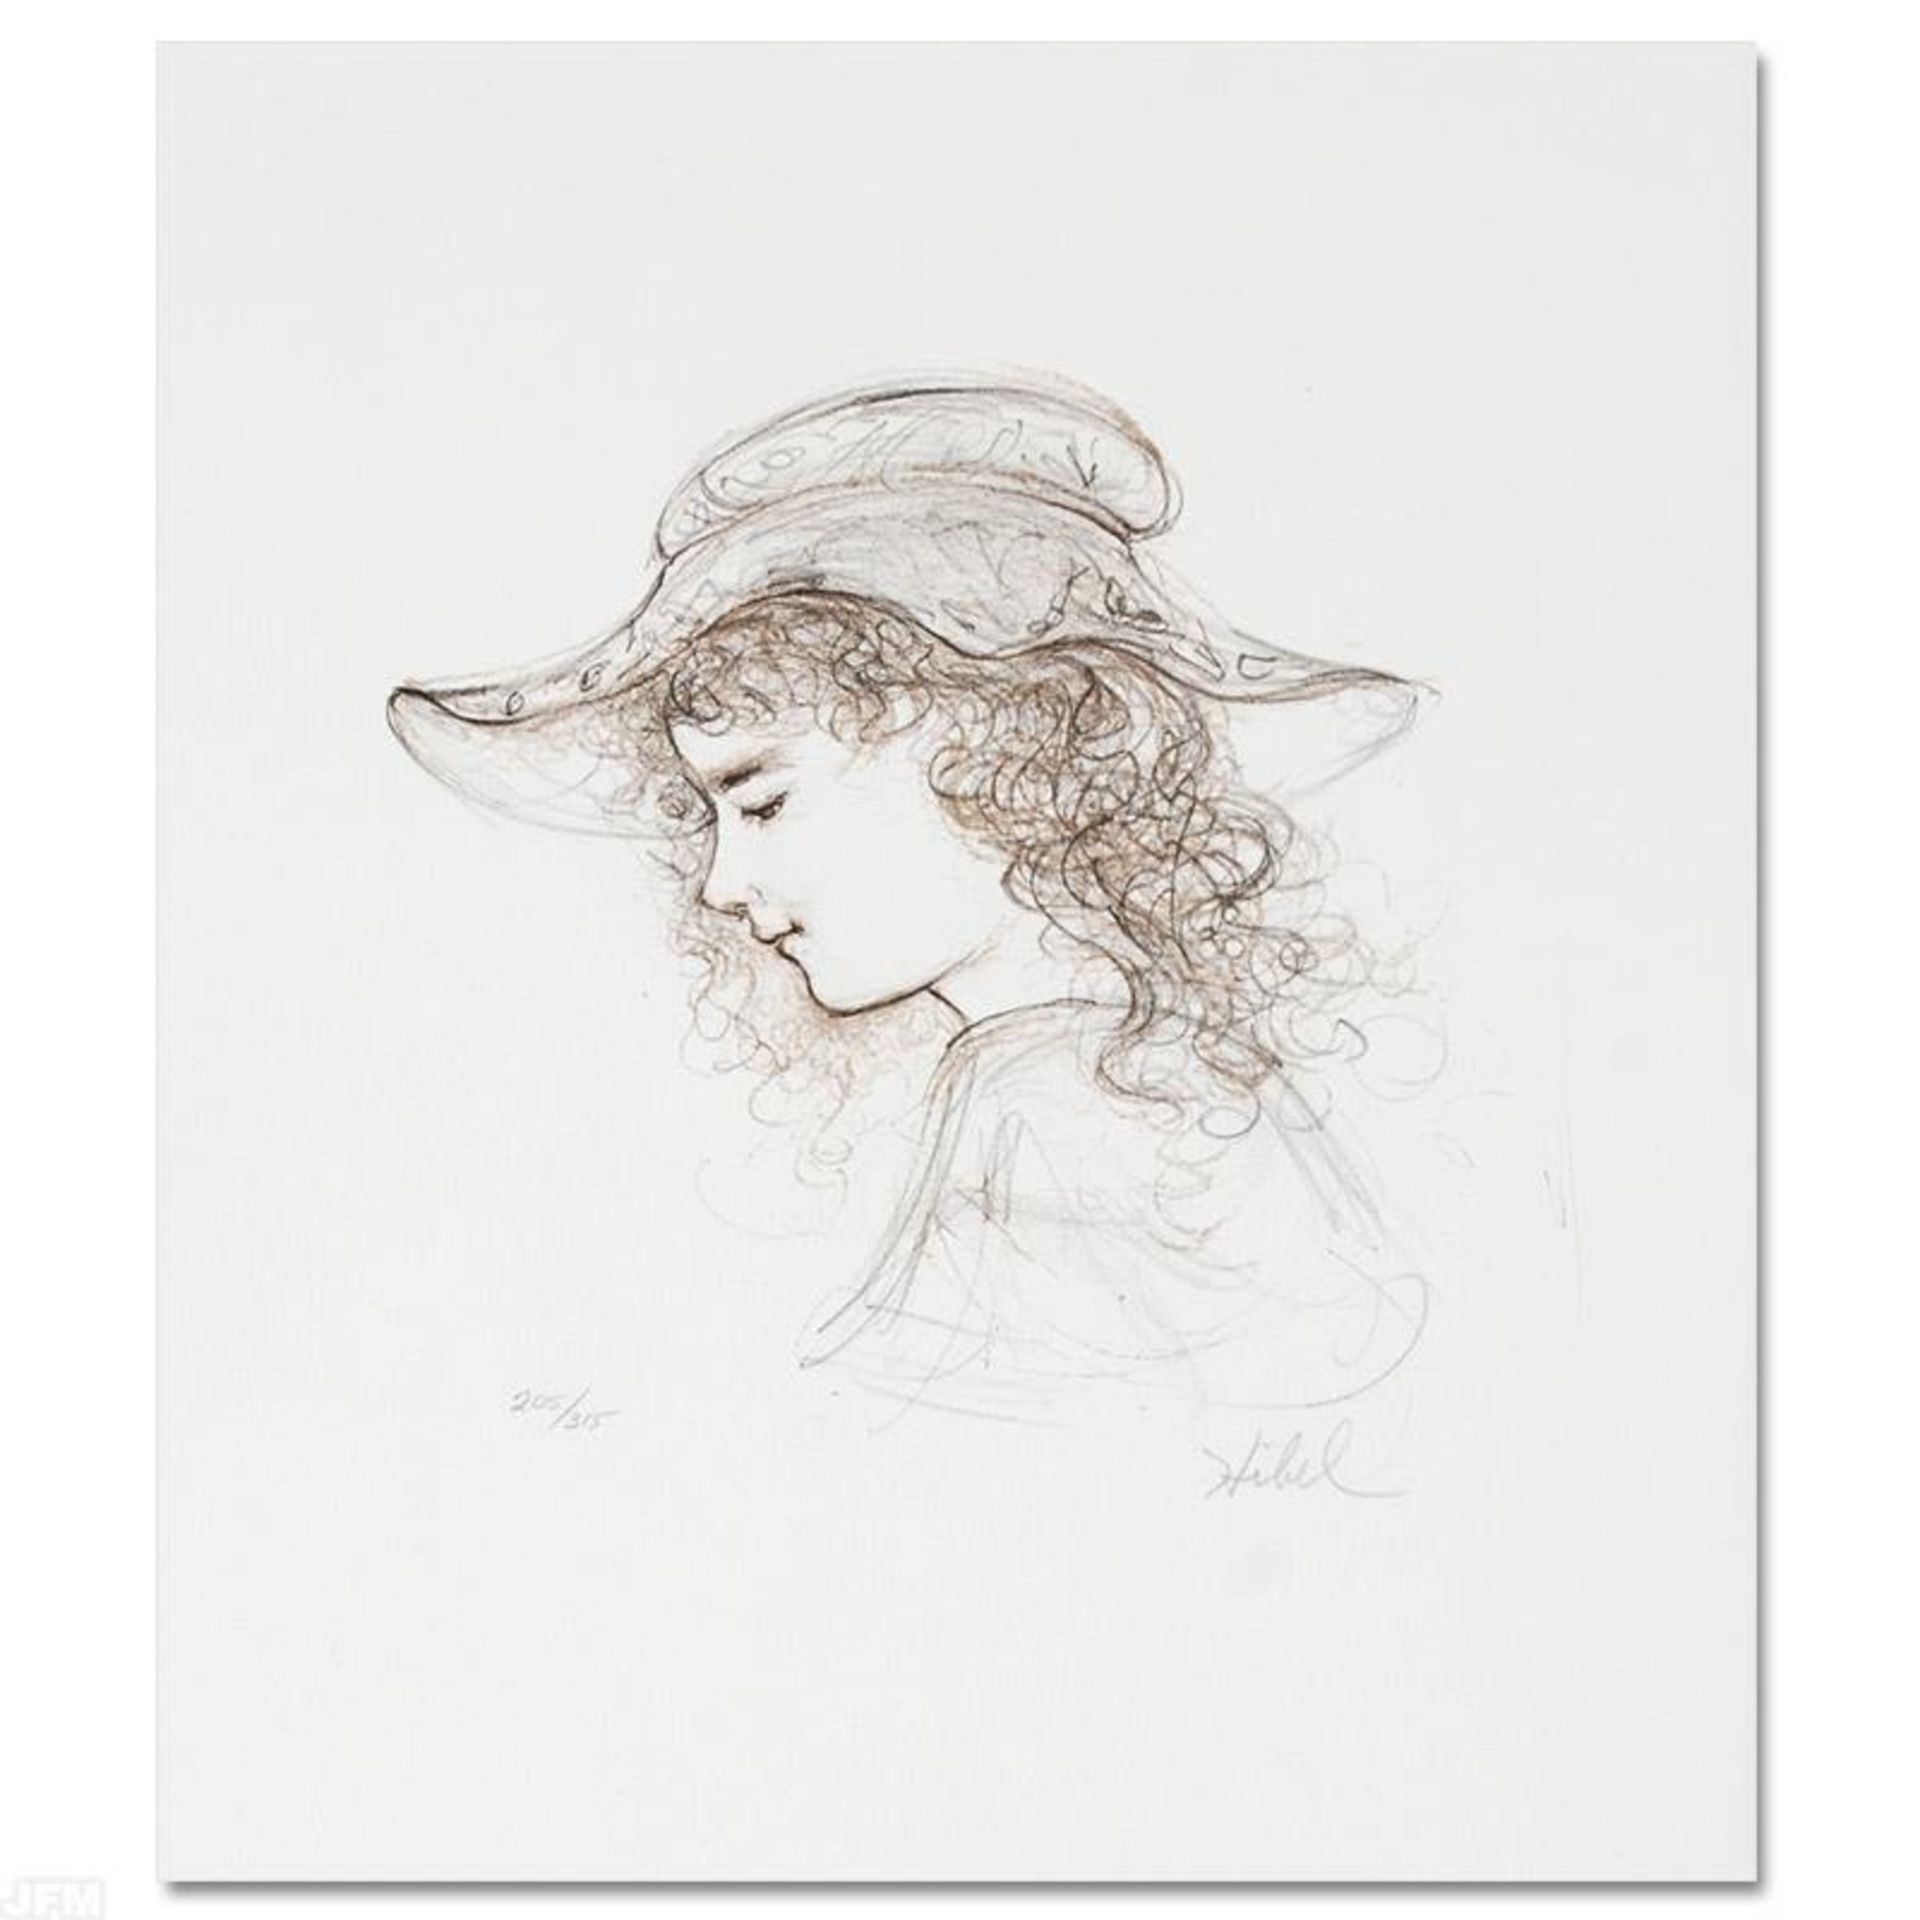 Hibel (1917-2014), "Elisabet" Limited Edition Lithograph, Numbered and Hand Sign